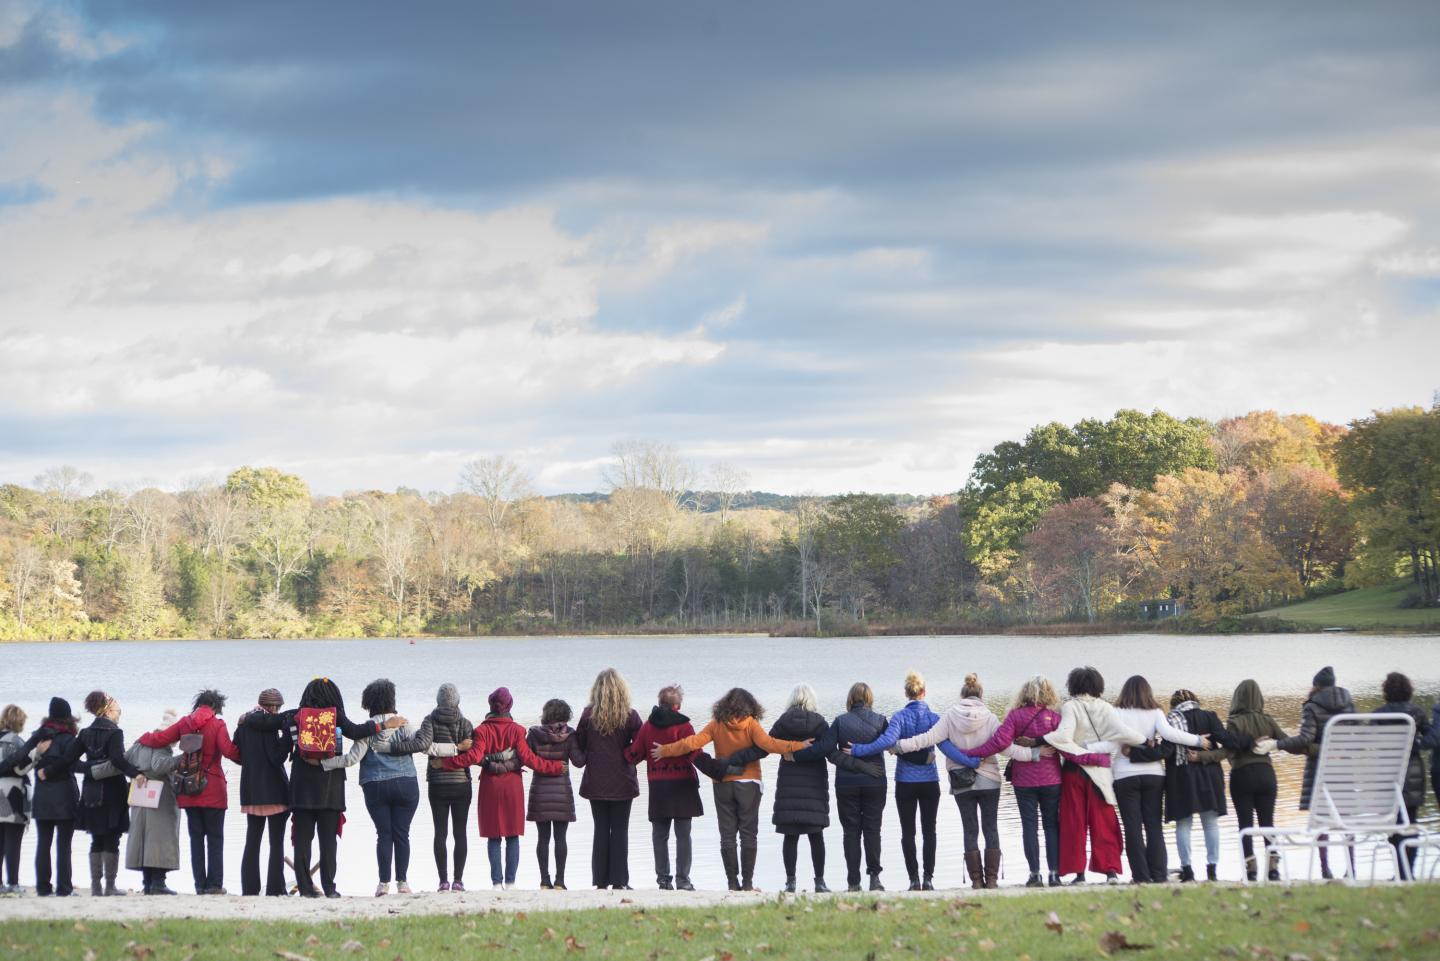 Many women standing arm in arm, looking over lake